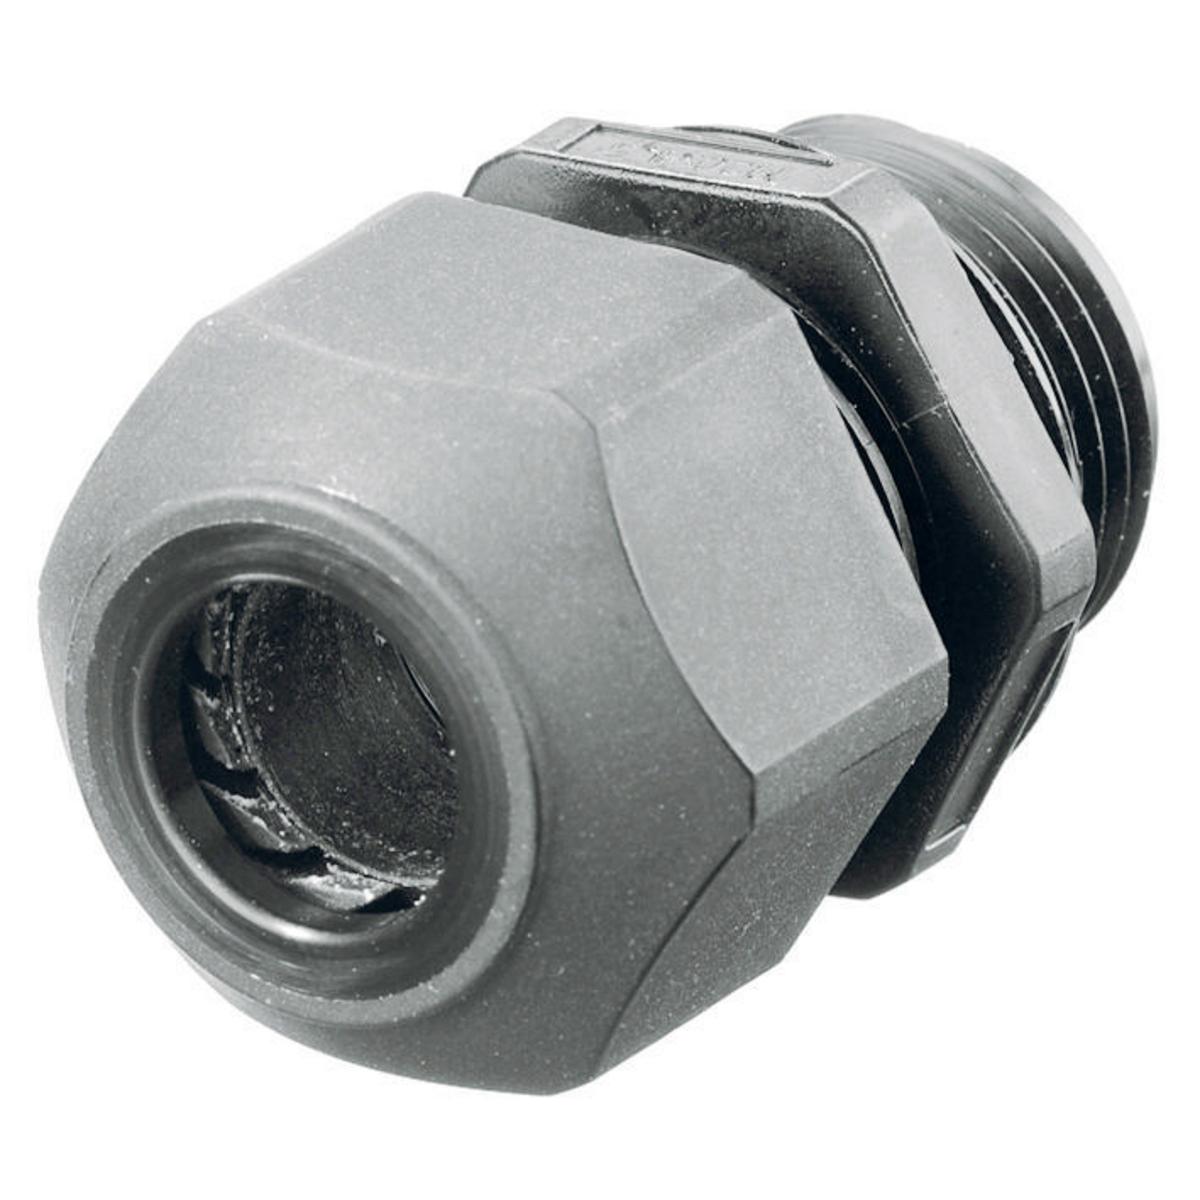 Hubbell SEC75RGA Kellems Wire Management, Cord Connectors, European Style .25-.48", 3/4", Gray  ; Standard Product